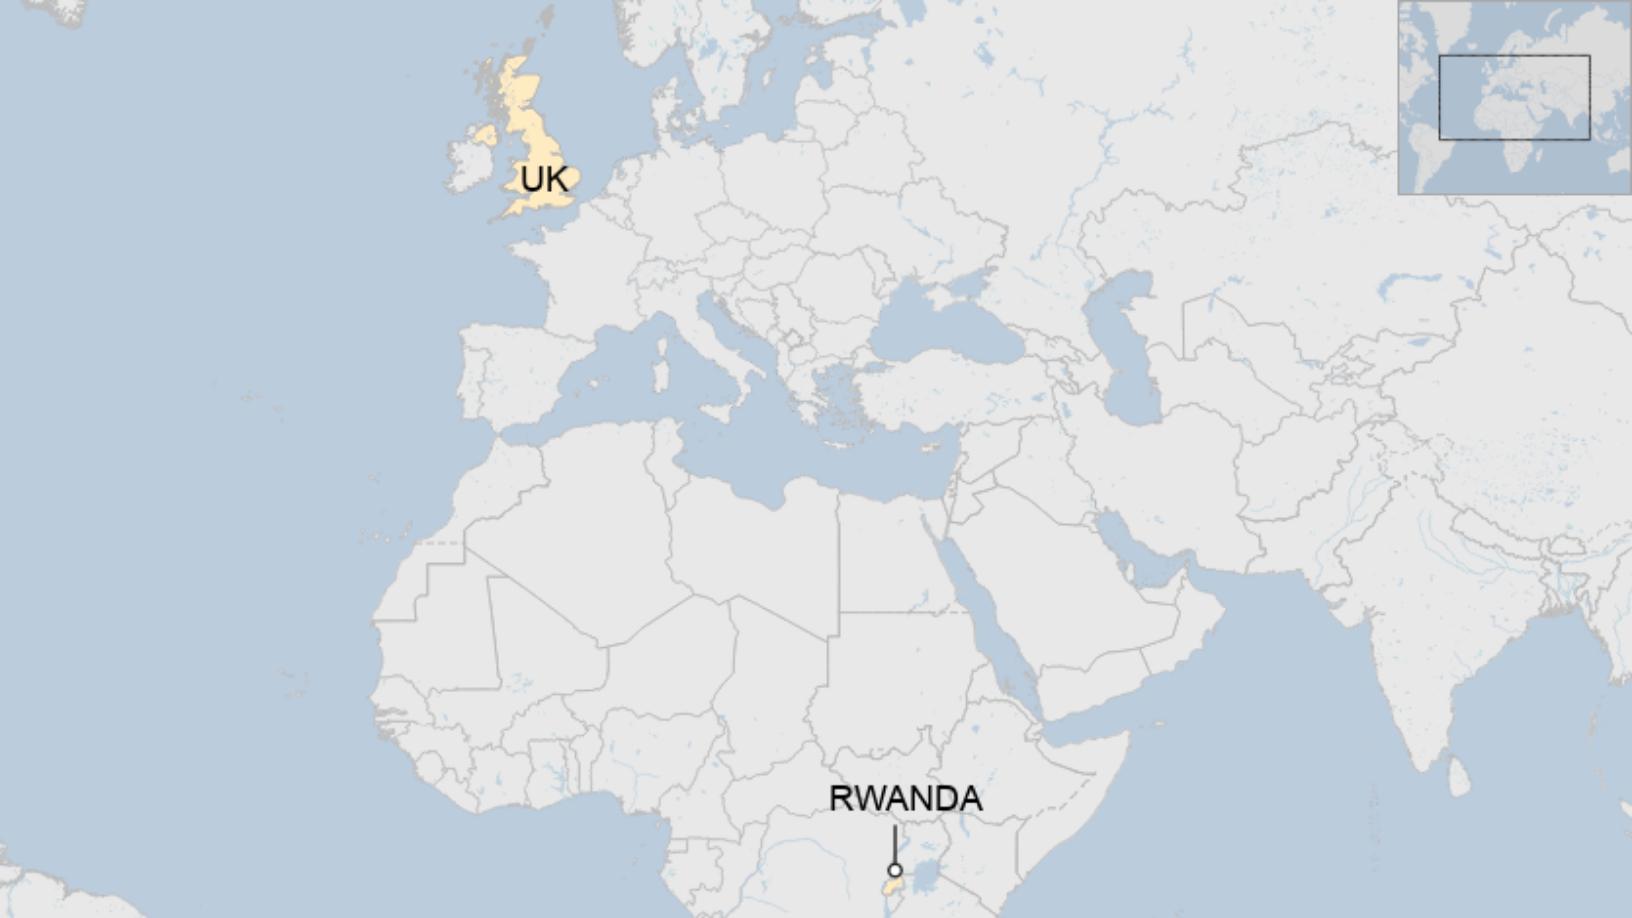 Map: A map showing the United Kingdom and Rwanda